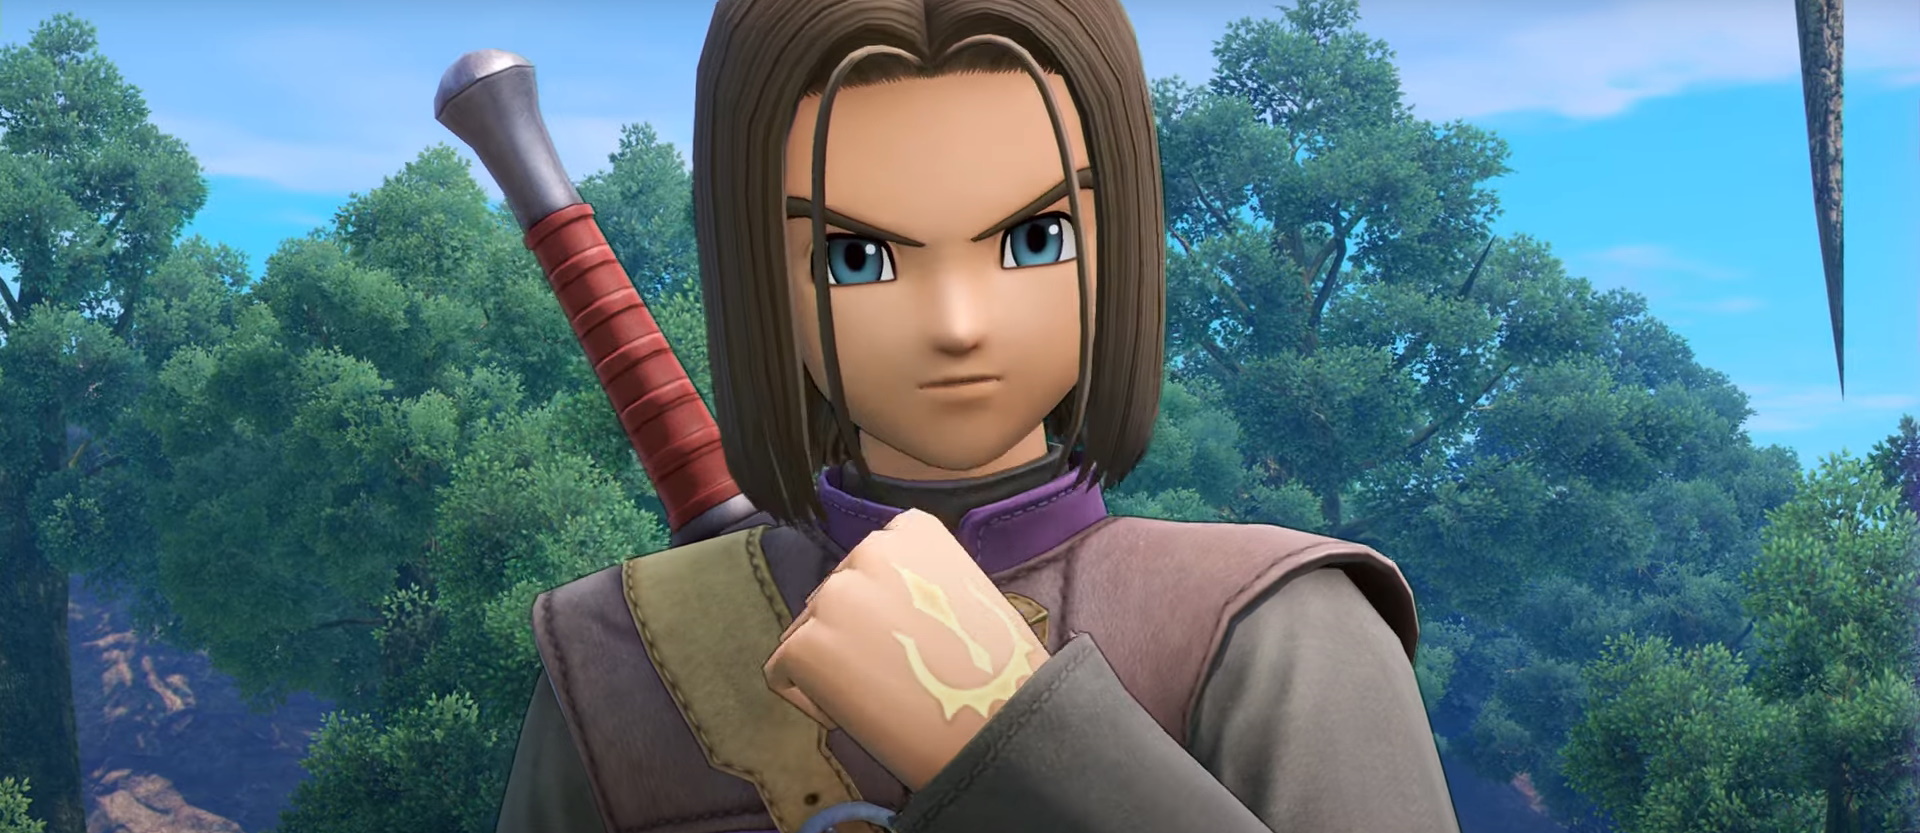 dragon-quest-xi-s-coming-to-xbox-game-pass-in-december.jpg